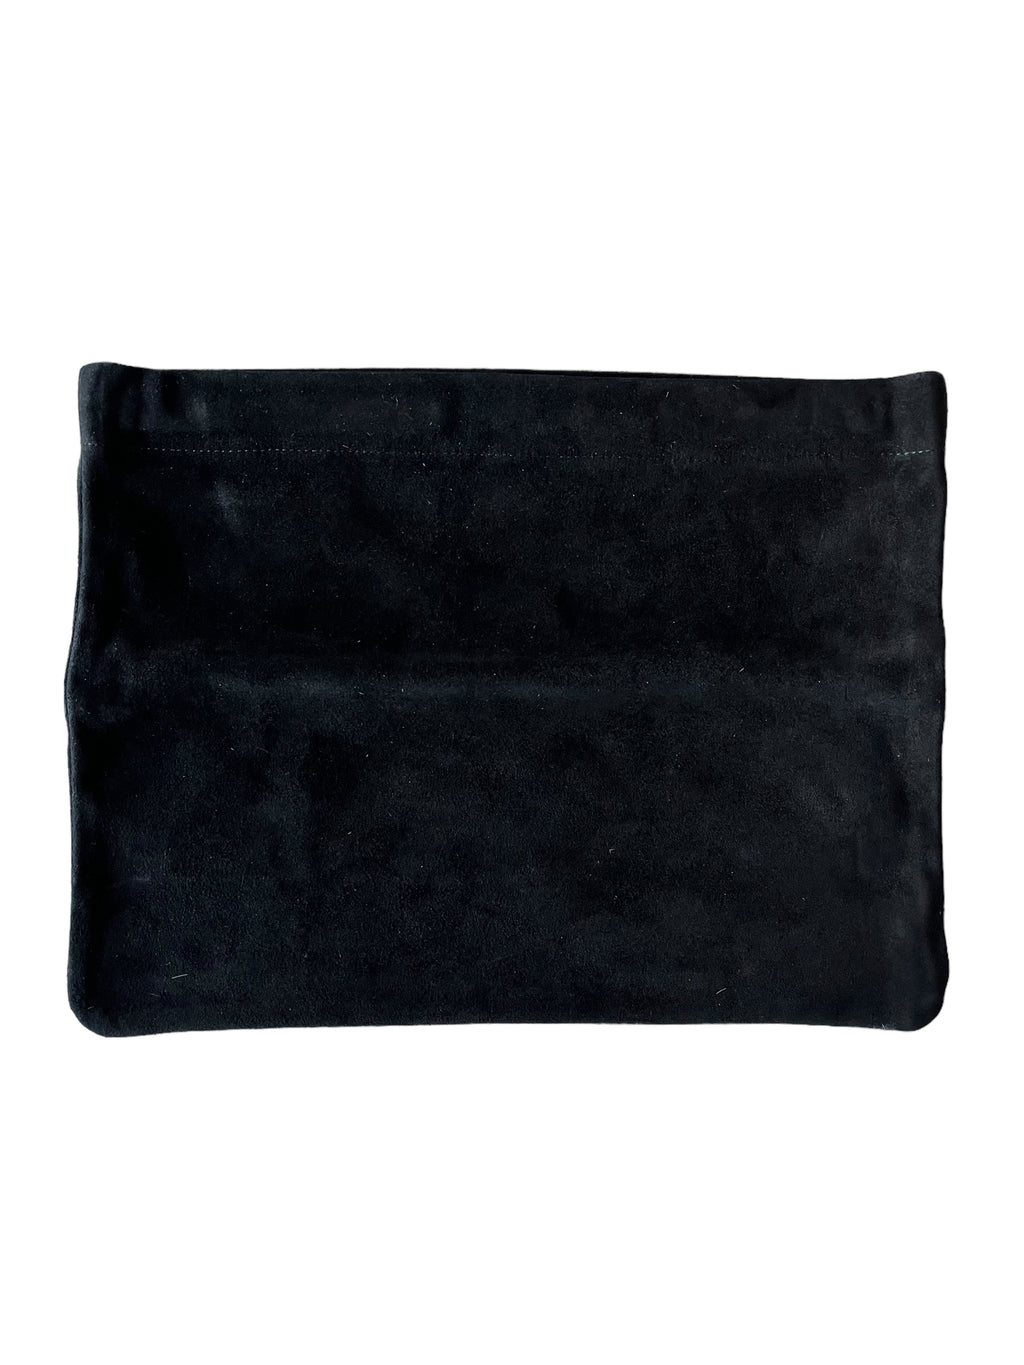 The Aintree Clutch - Black Suede